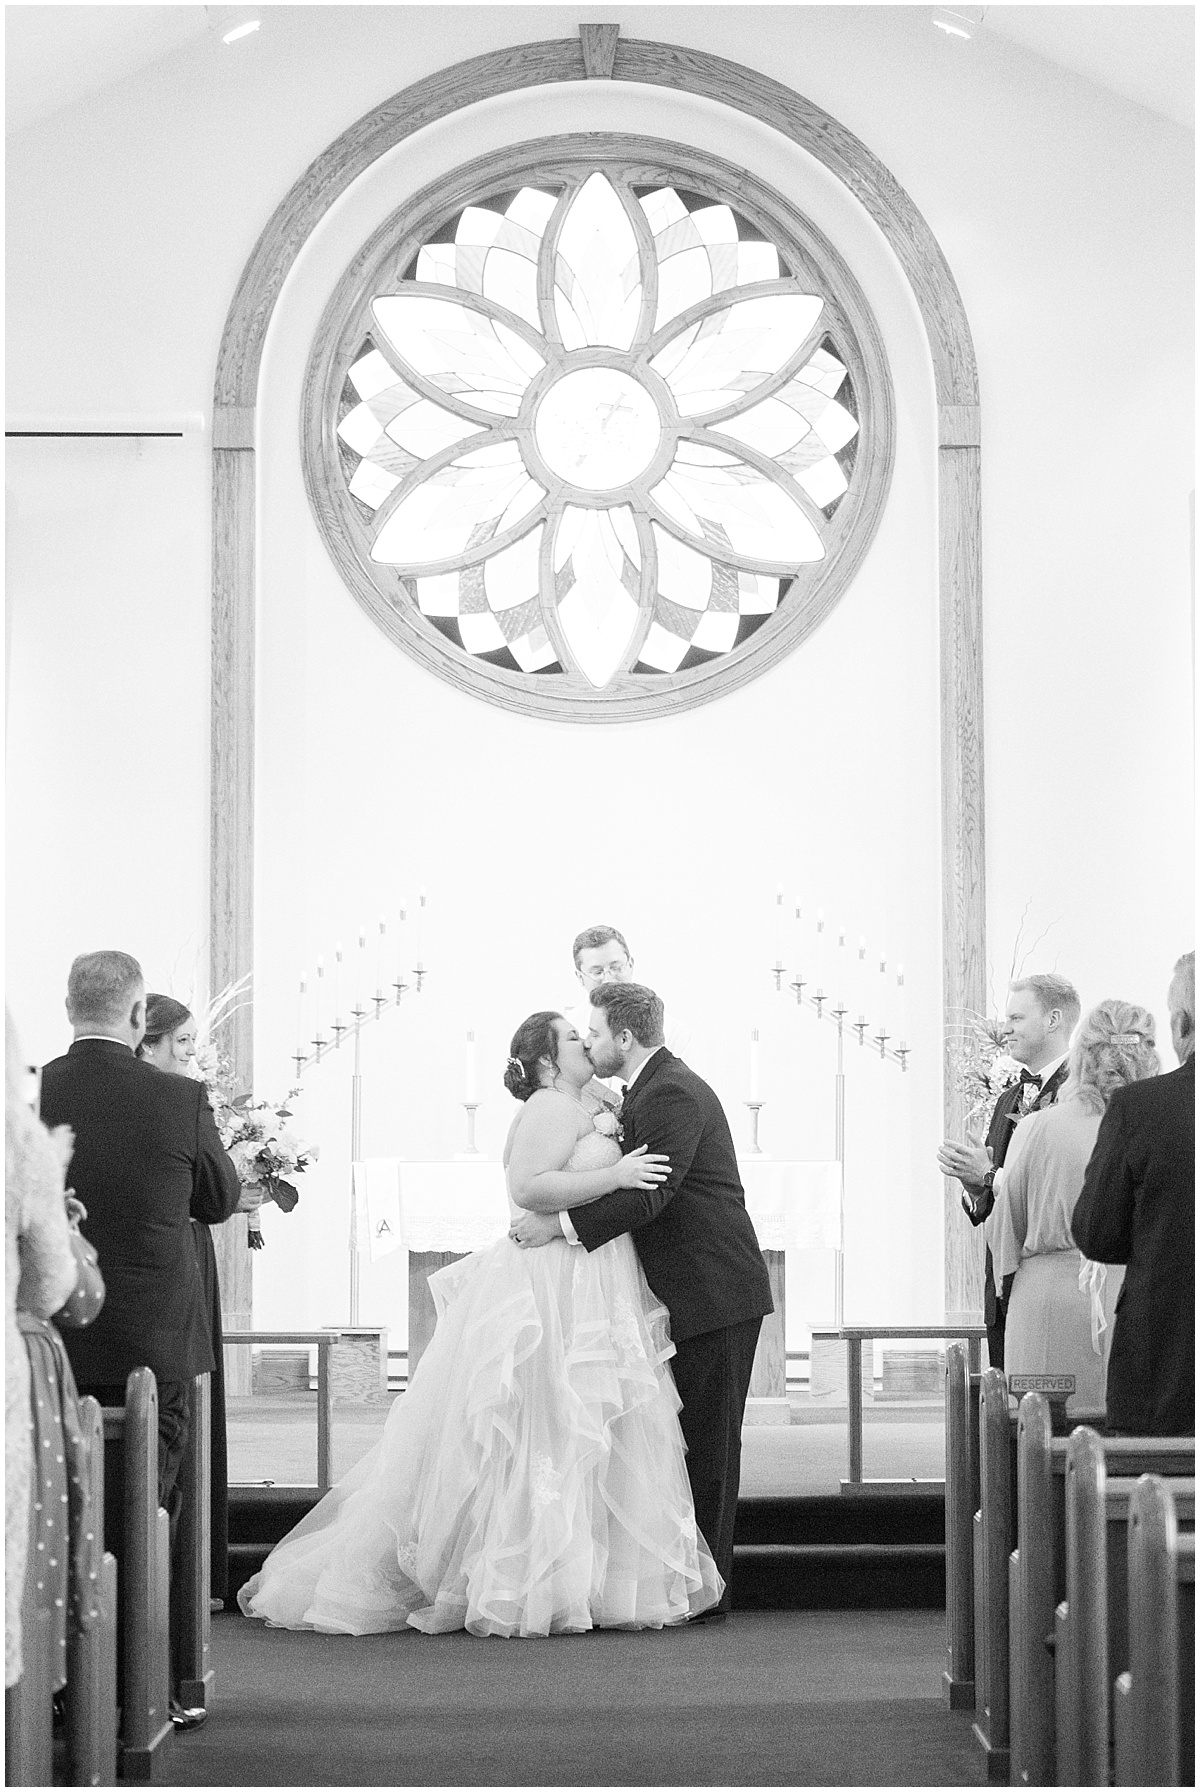 Chris and Ashley Peterson - Wedding at the Jasper County Fairgrounds in Rensselaer, Indiana75.jpg